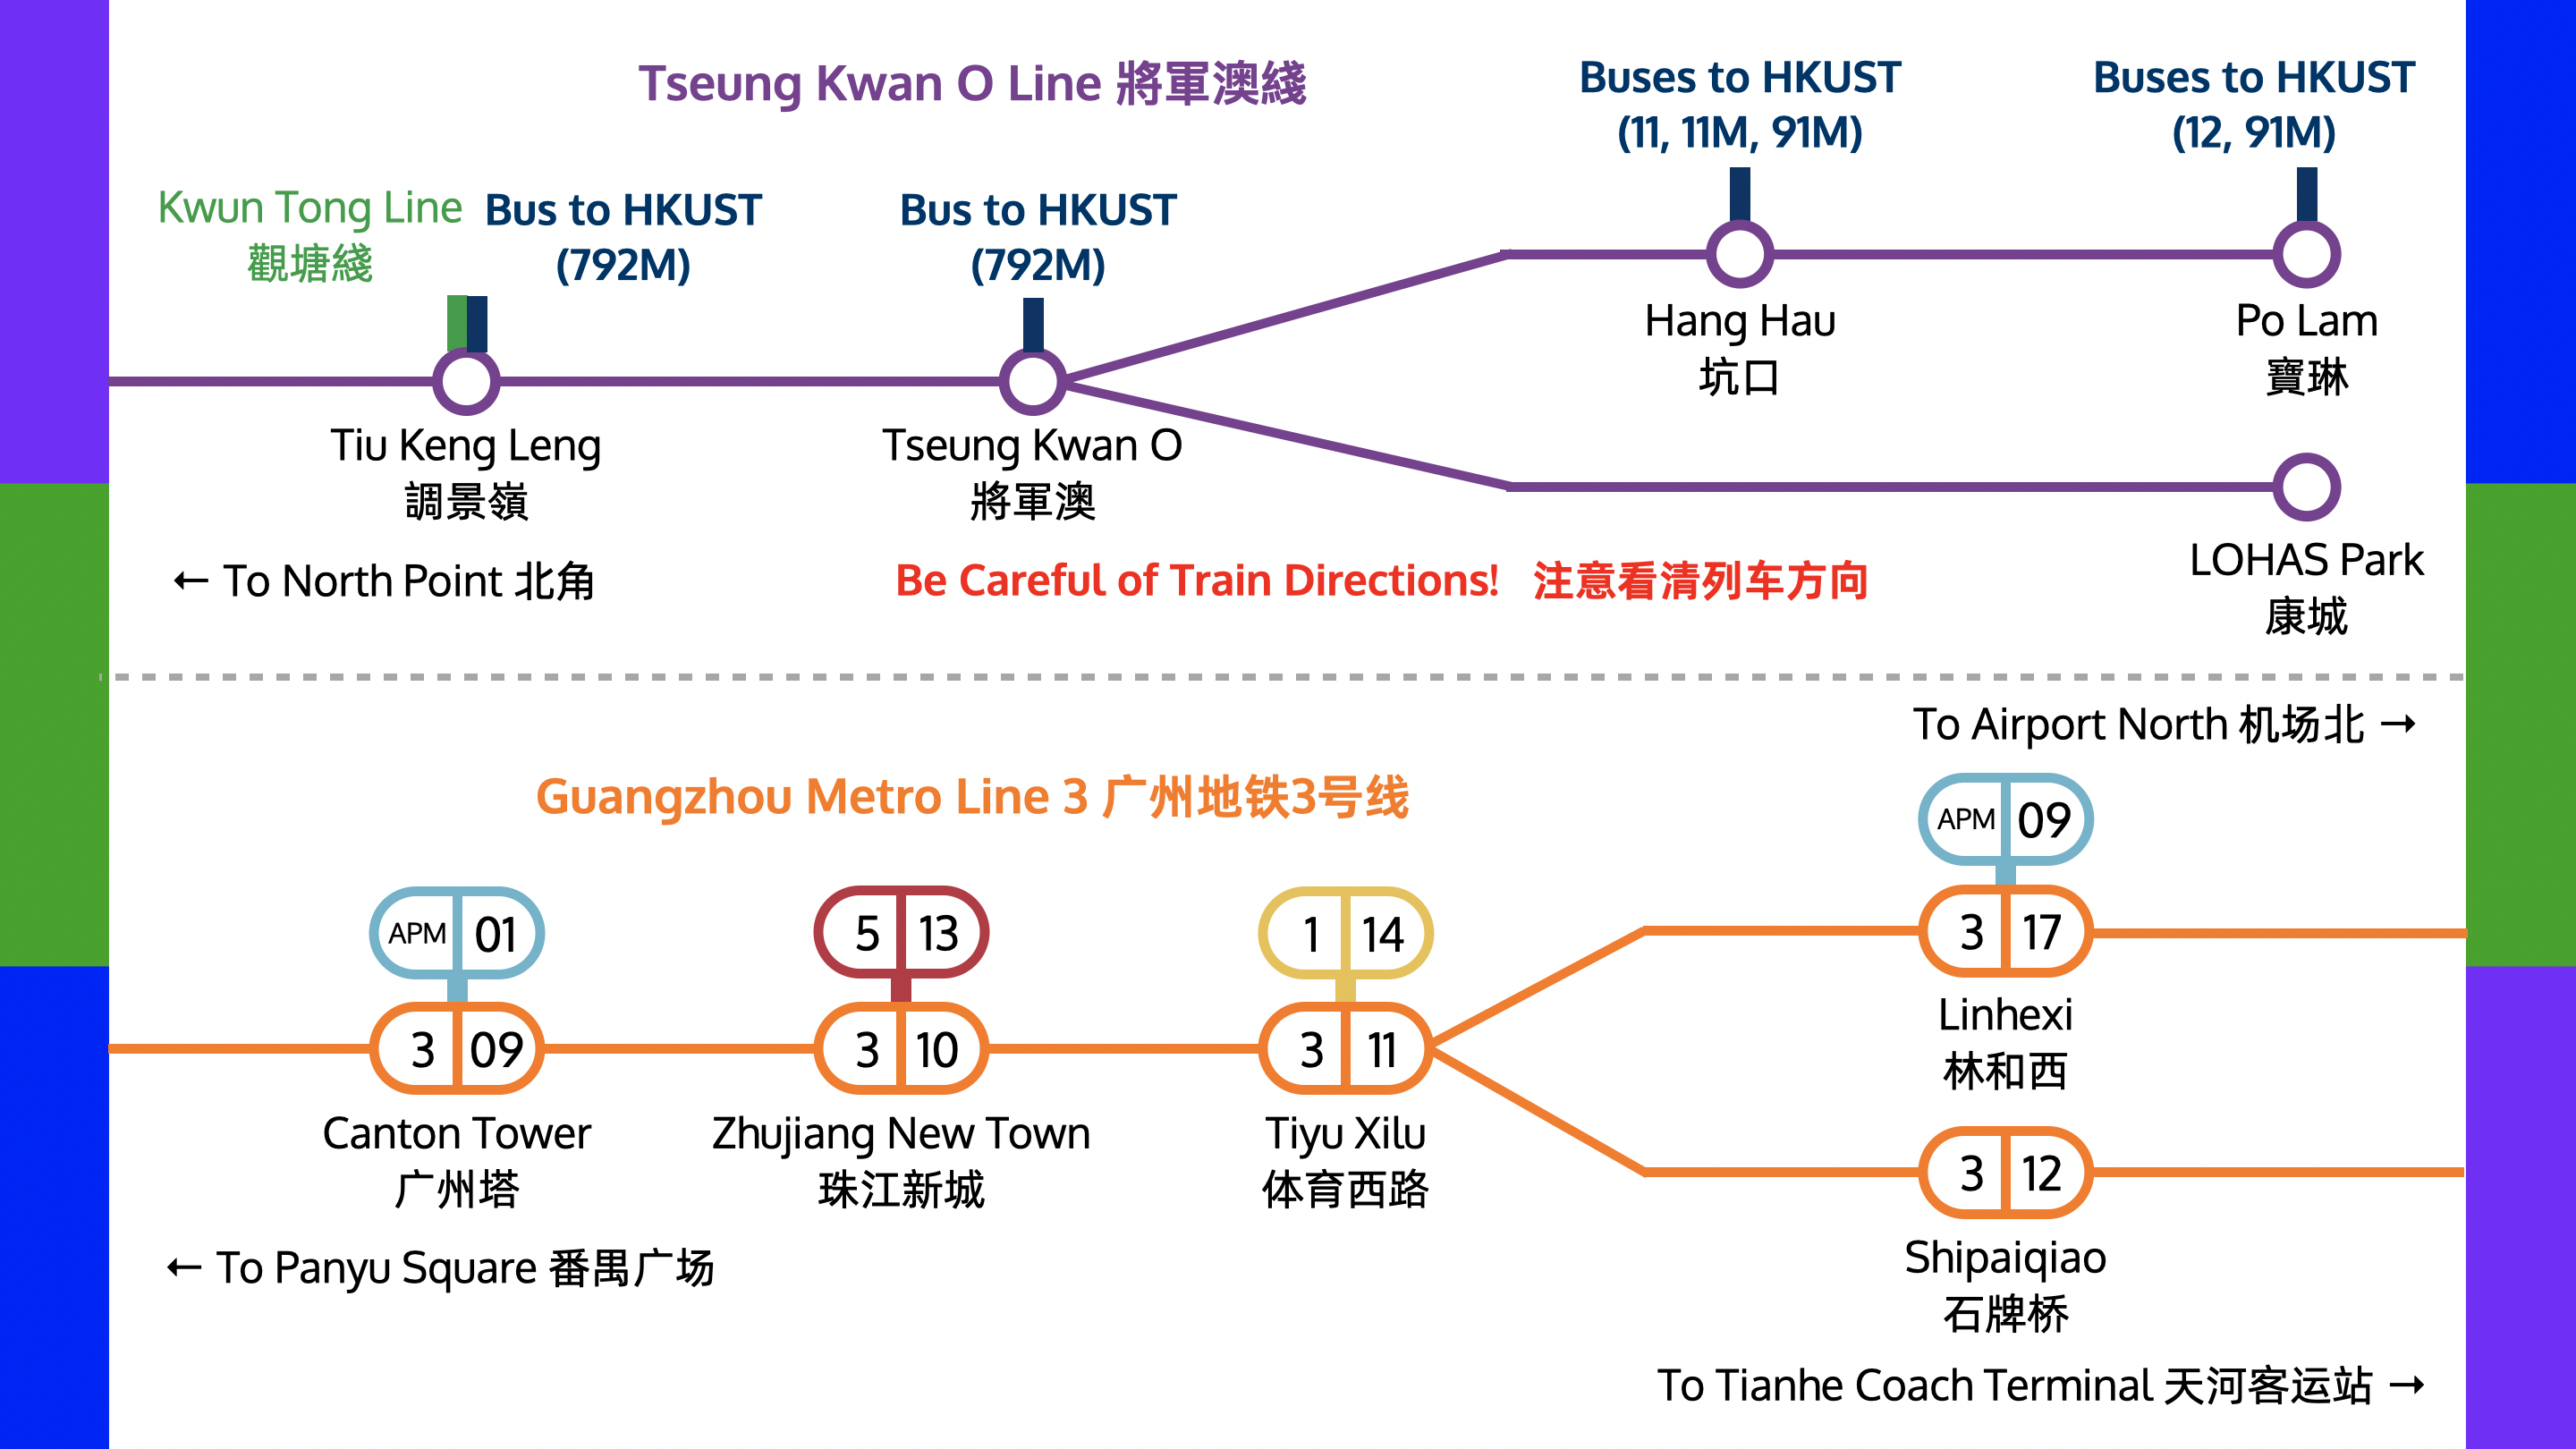 Branches of MTR Tseung Kwan O Line and Guangzhou Metro Line 3